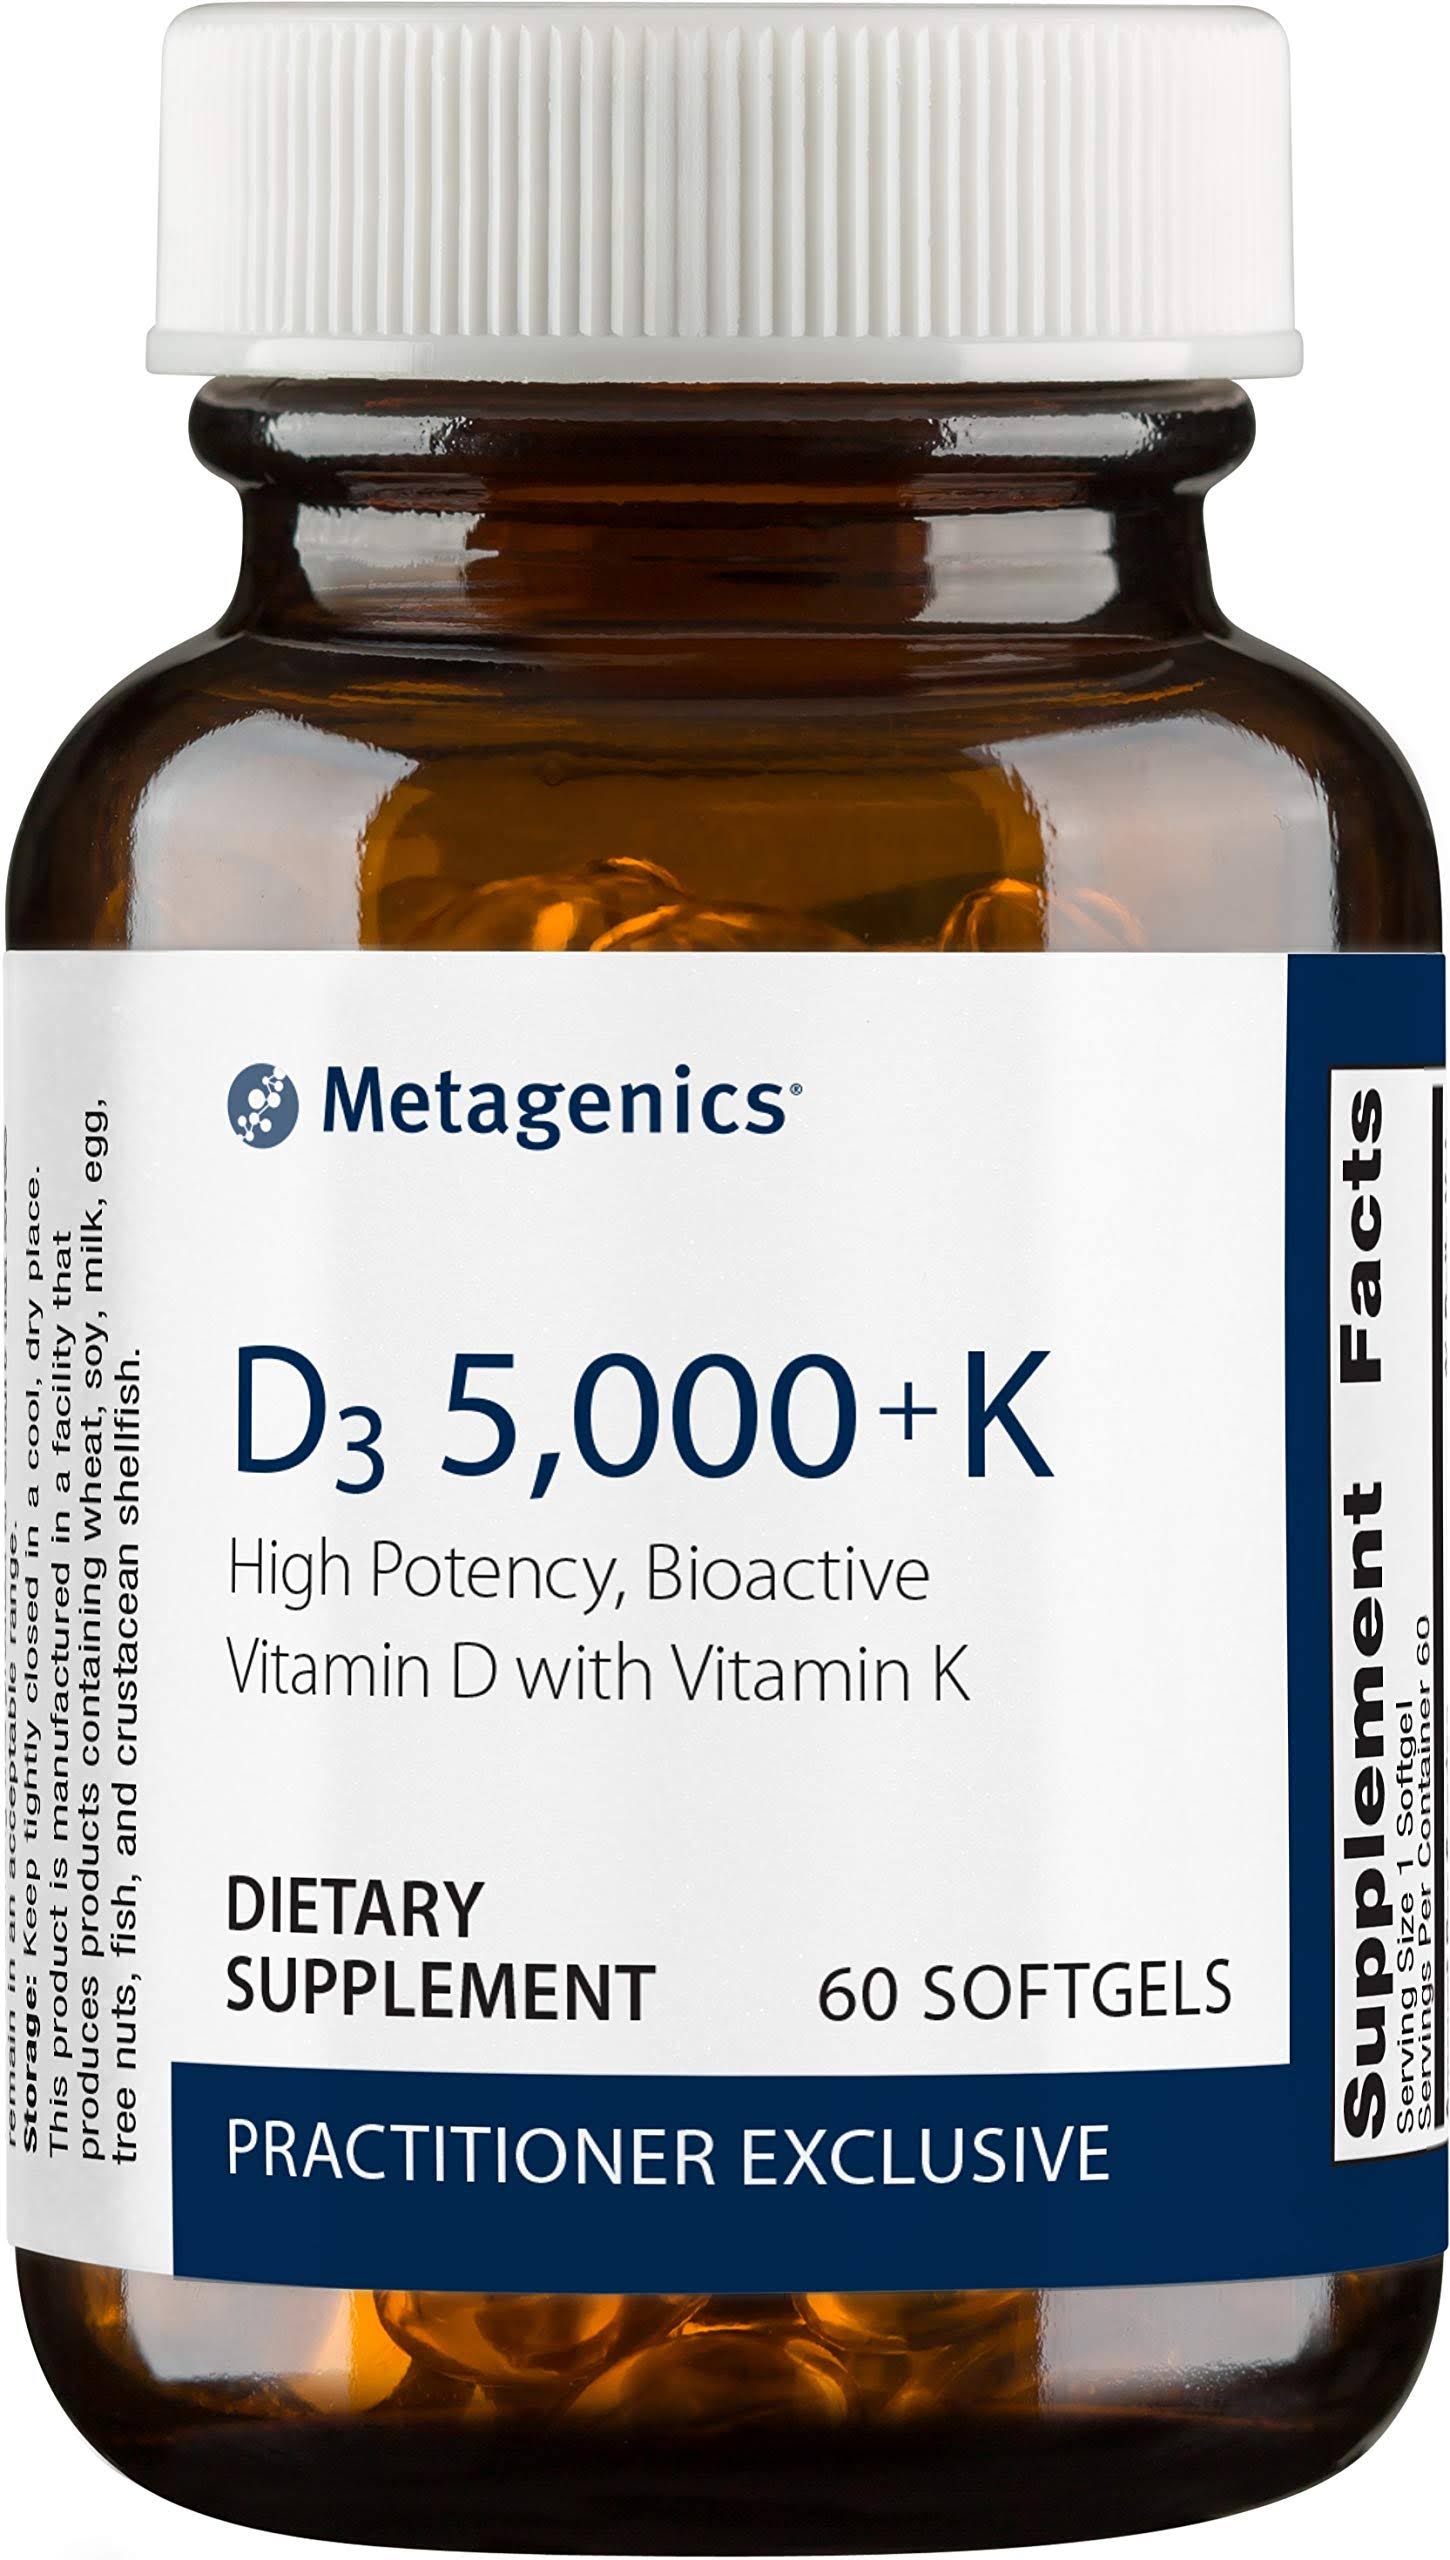 Metagenics Vitamin D3 5,000 IU With Vitamin K2 - Vitamin D Supplement For Healthy Bone Formation, Cardiovascular Health, And Immune Support - 60 Count